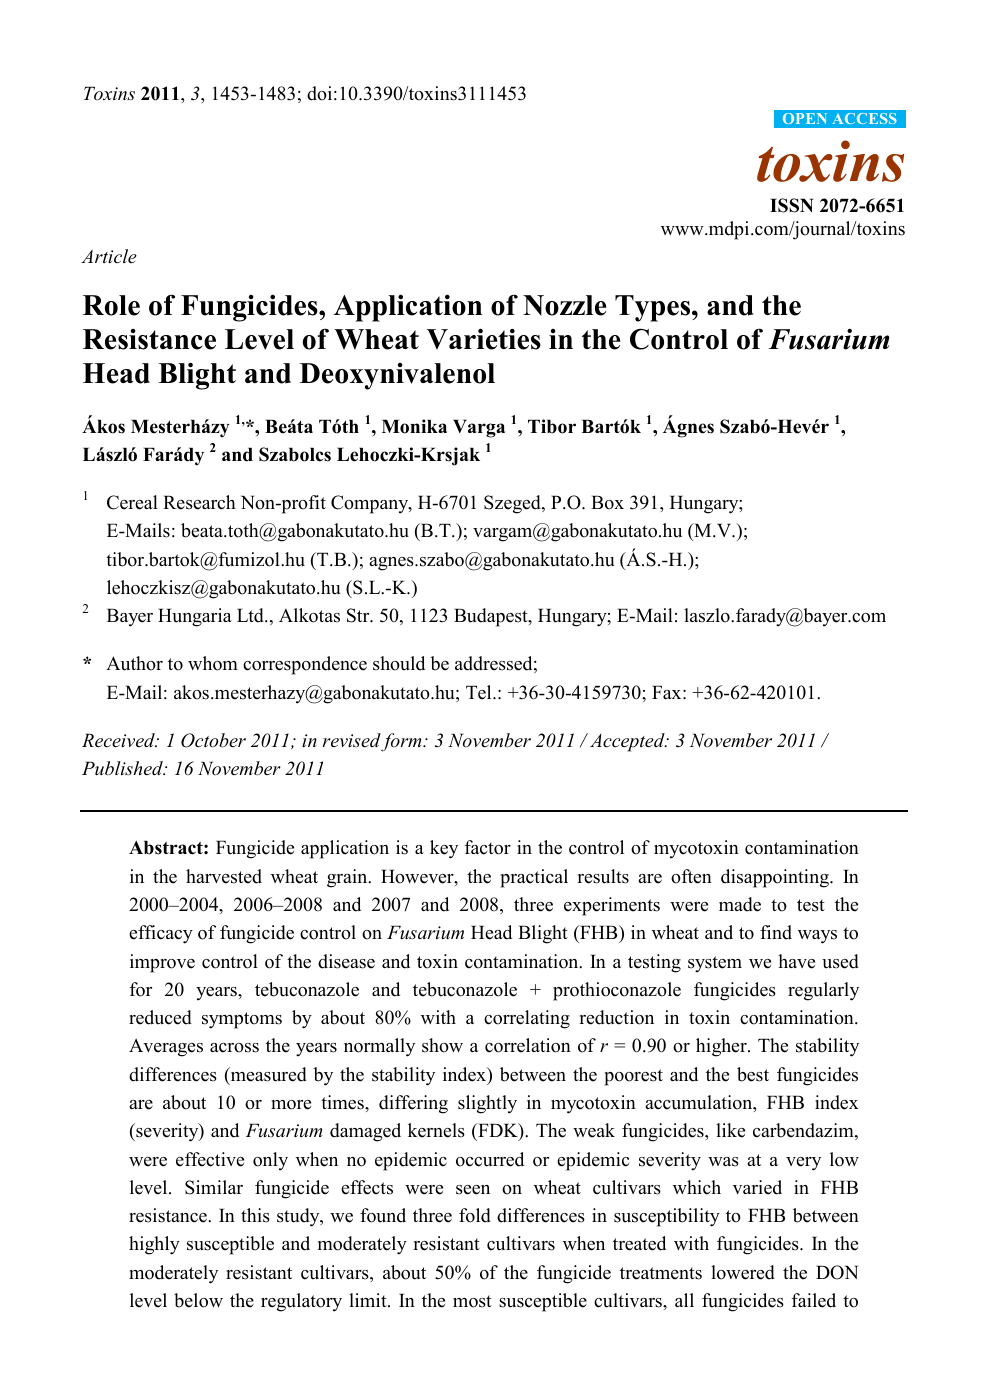 Role Of Fungicides Application Of Nozzle Types And The Resistance Level Of Wheat Varieties In The Control Of Fusarium Head Blight And Deoxynivalenol Topic Of Research Paper In Biological Sciences Download